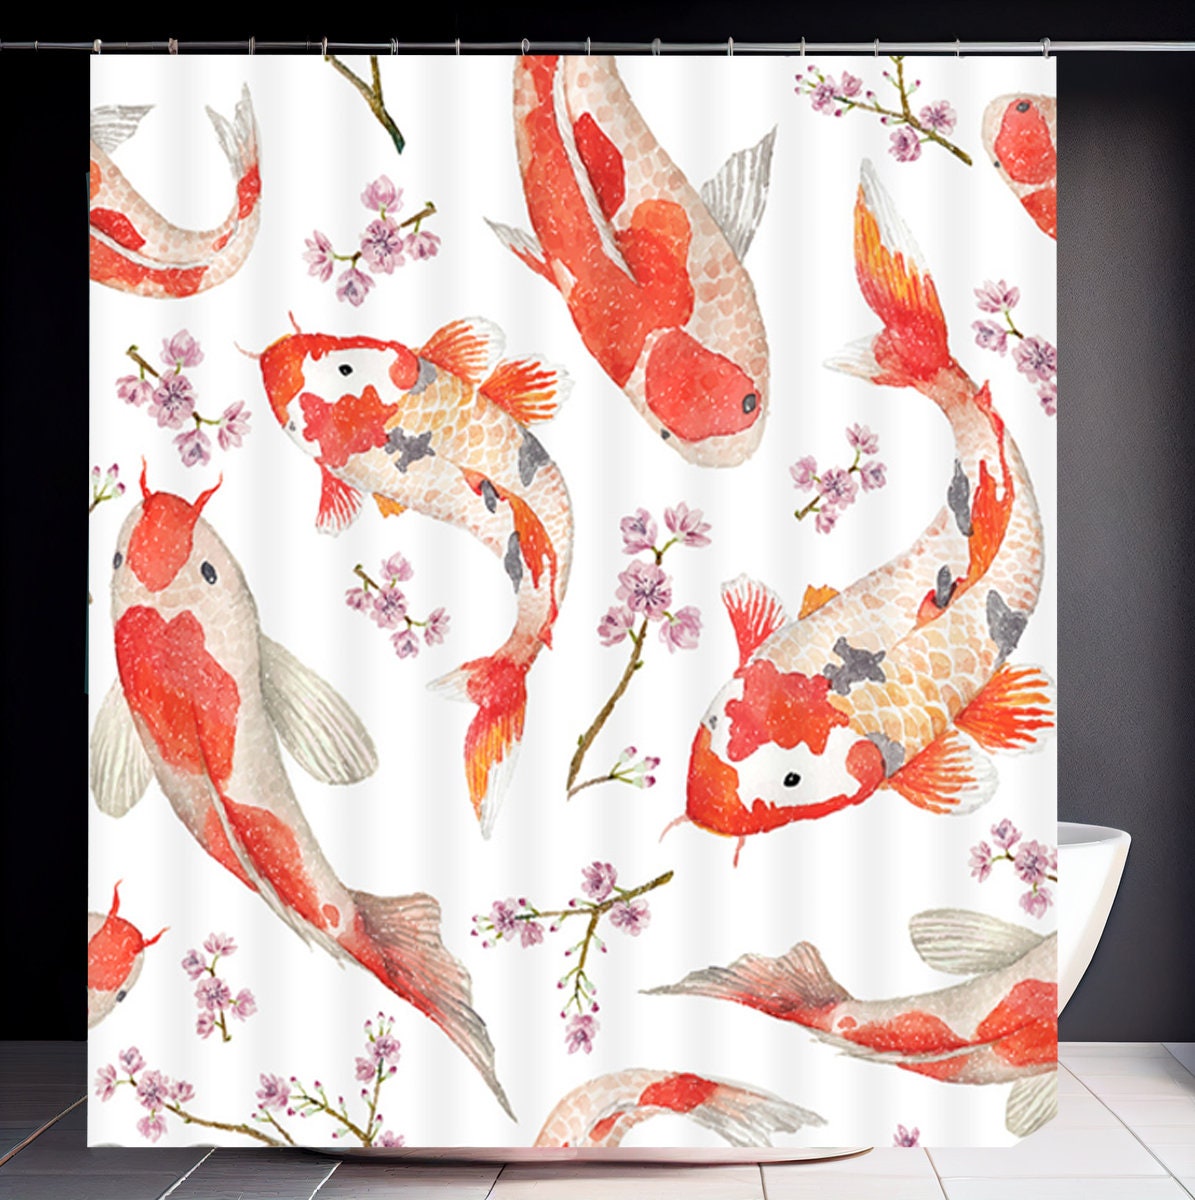 Koi Fish Shower Curtain Japanese Floral Cherry Blossom Bathroom Curtains  Watercolor Style Waterproof Washable Polyester Fabric Bath Decor 